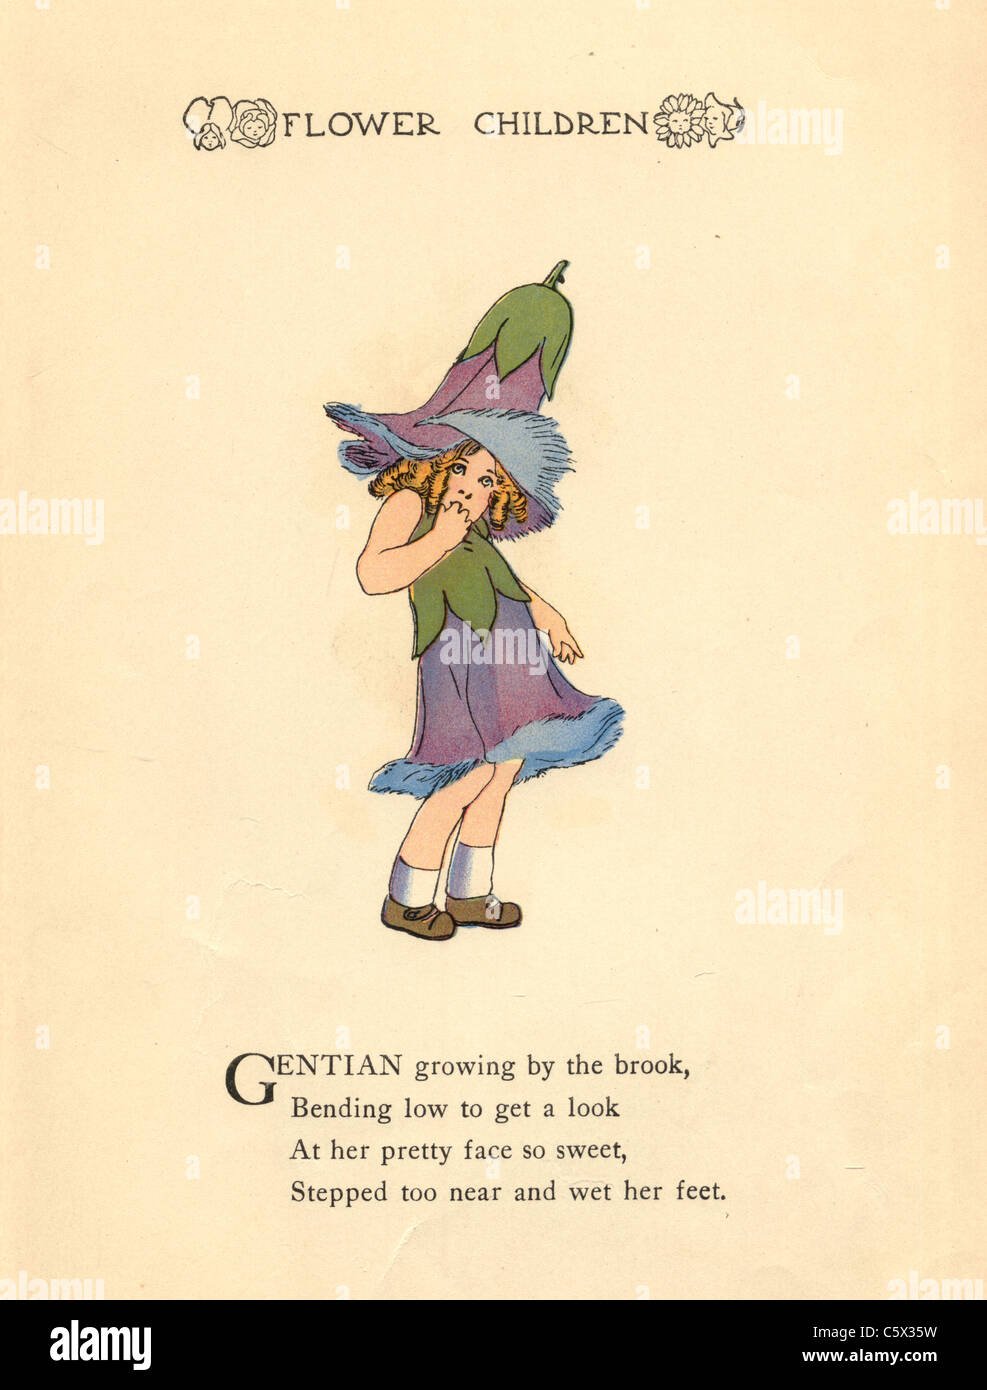 Gentian - Flower Child Illustration from an antiquarian book Stock Photo